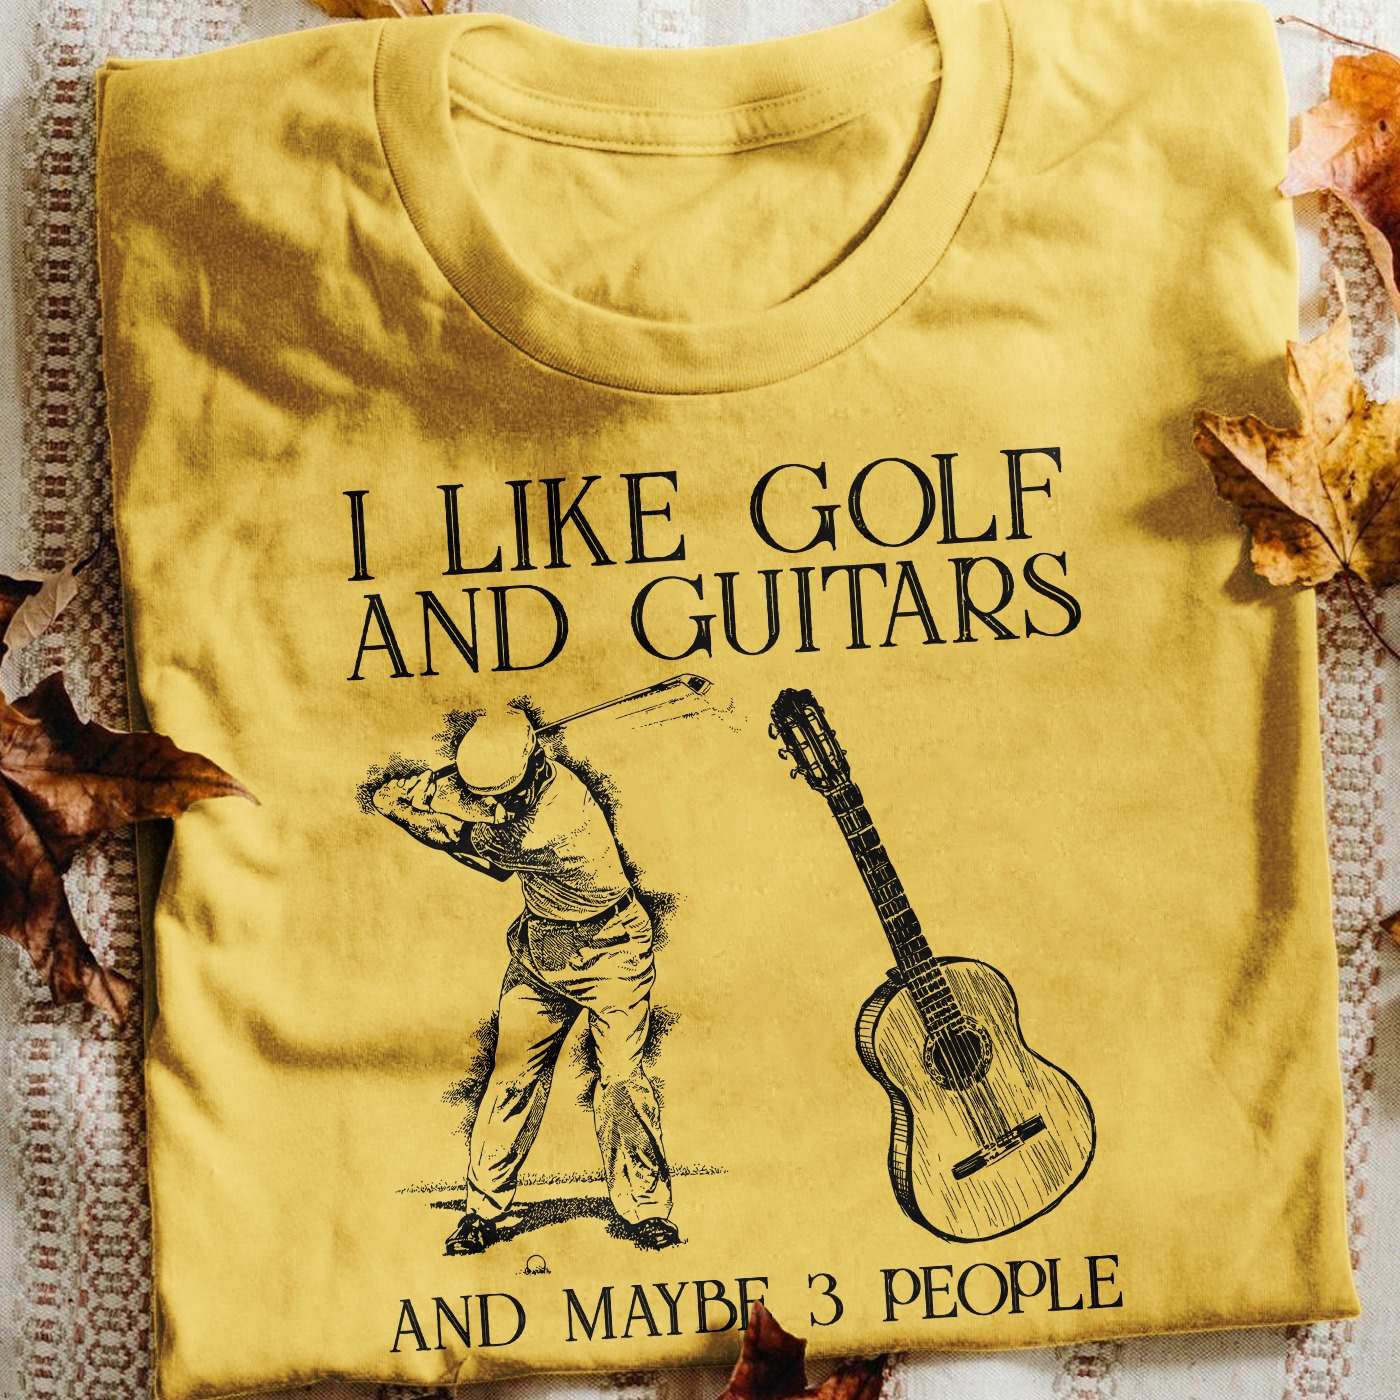 I like golf and guitars and maybe 3 people - Man playing golf